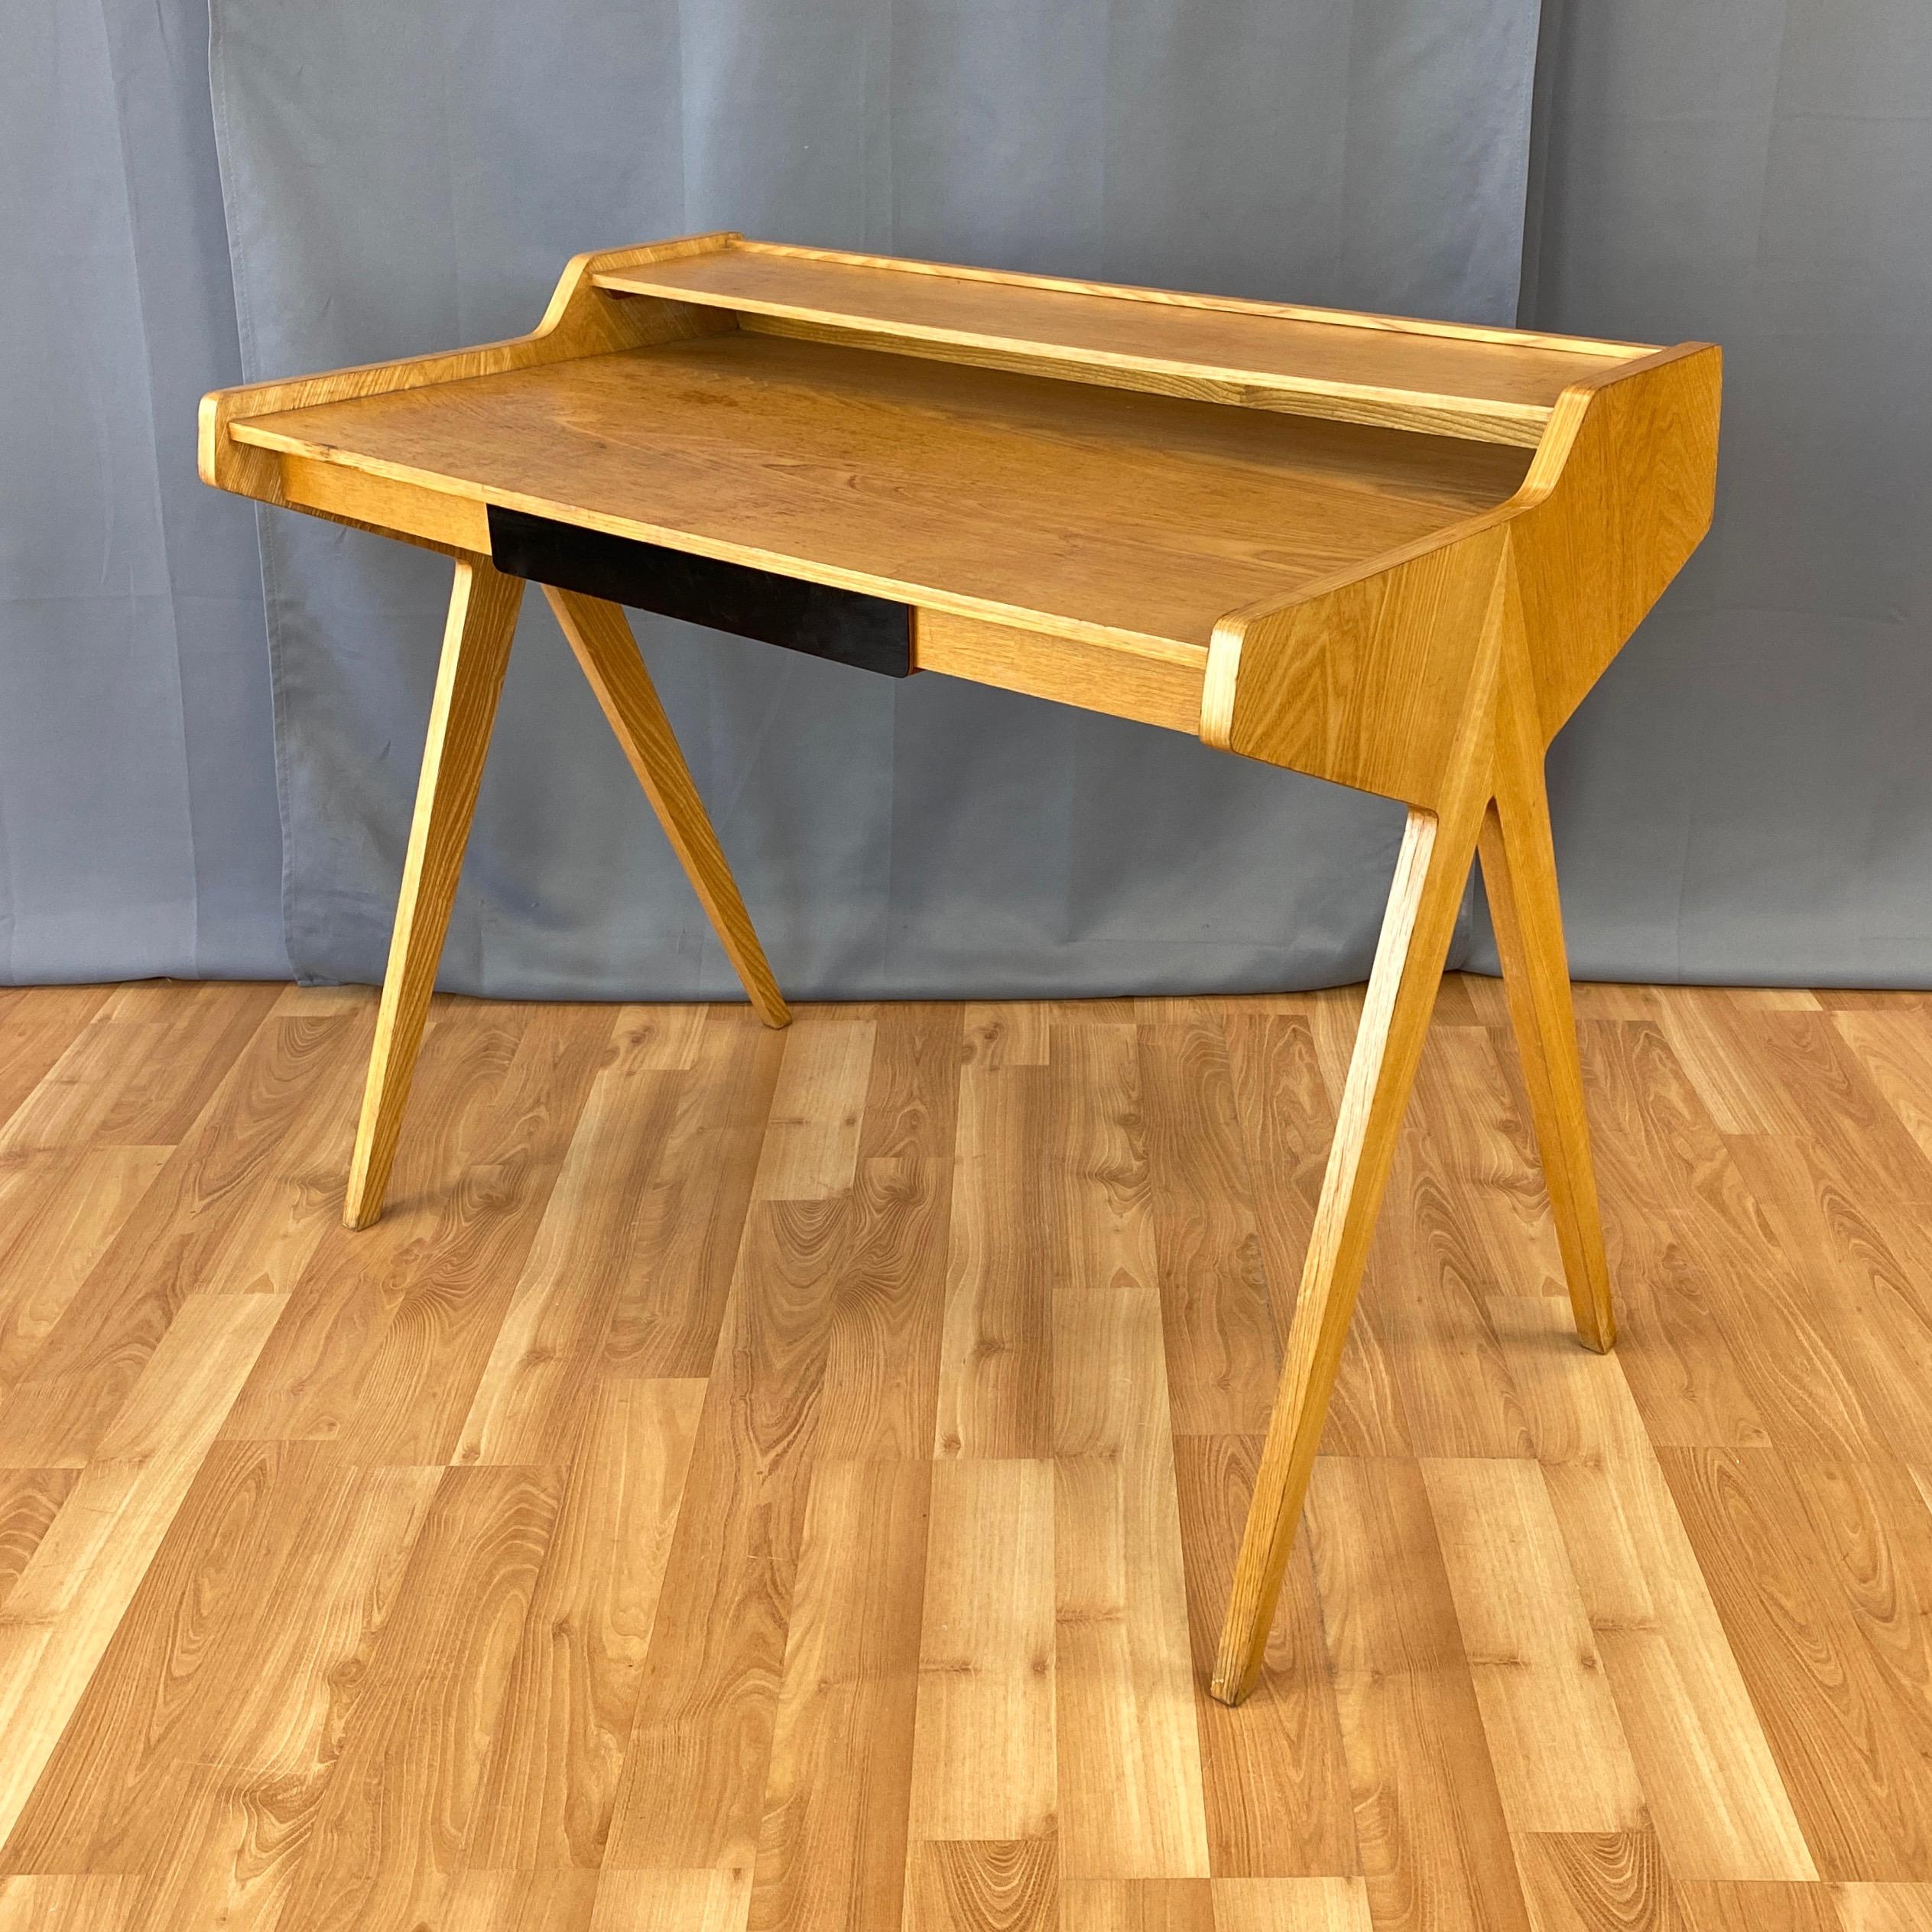 A 1950s elm desk on compass-style legs with drawer and cubby, designed by German architect Helmut Magg for the international European furniture competition “Neue Gemeinschaft für Wohnkultur”, and produced by WK Wohnen Möbel.

Modernist distillation